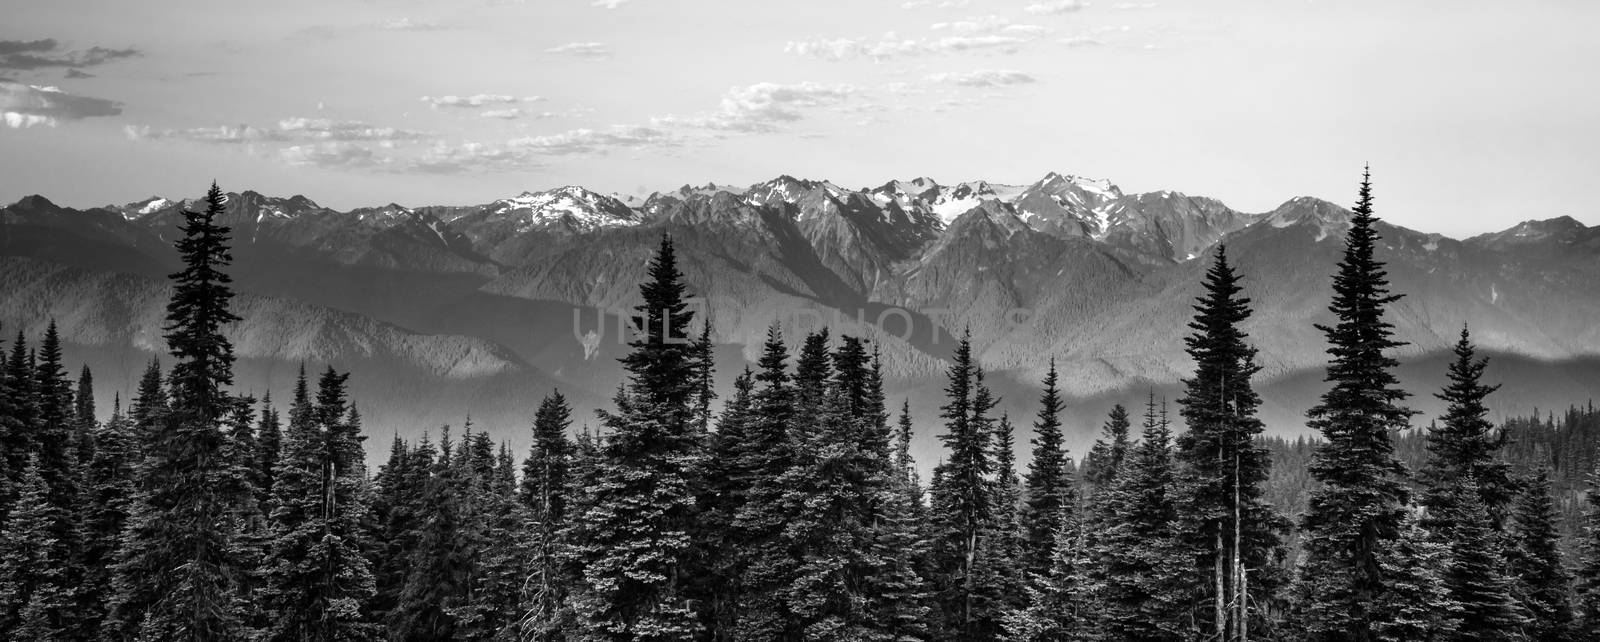 Early Morning Light Olympic Mountains Hurricane Ridge by ChrisBoswell